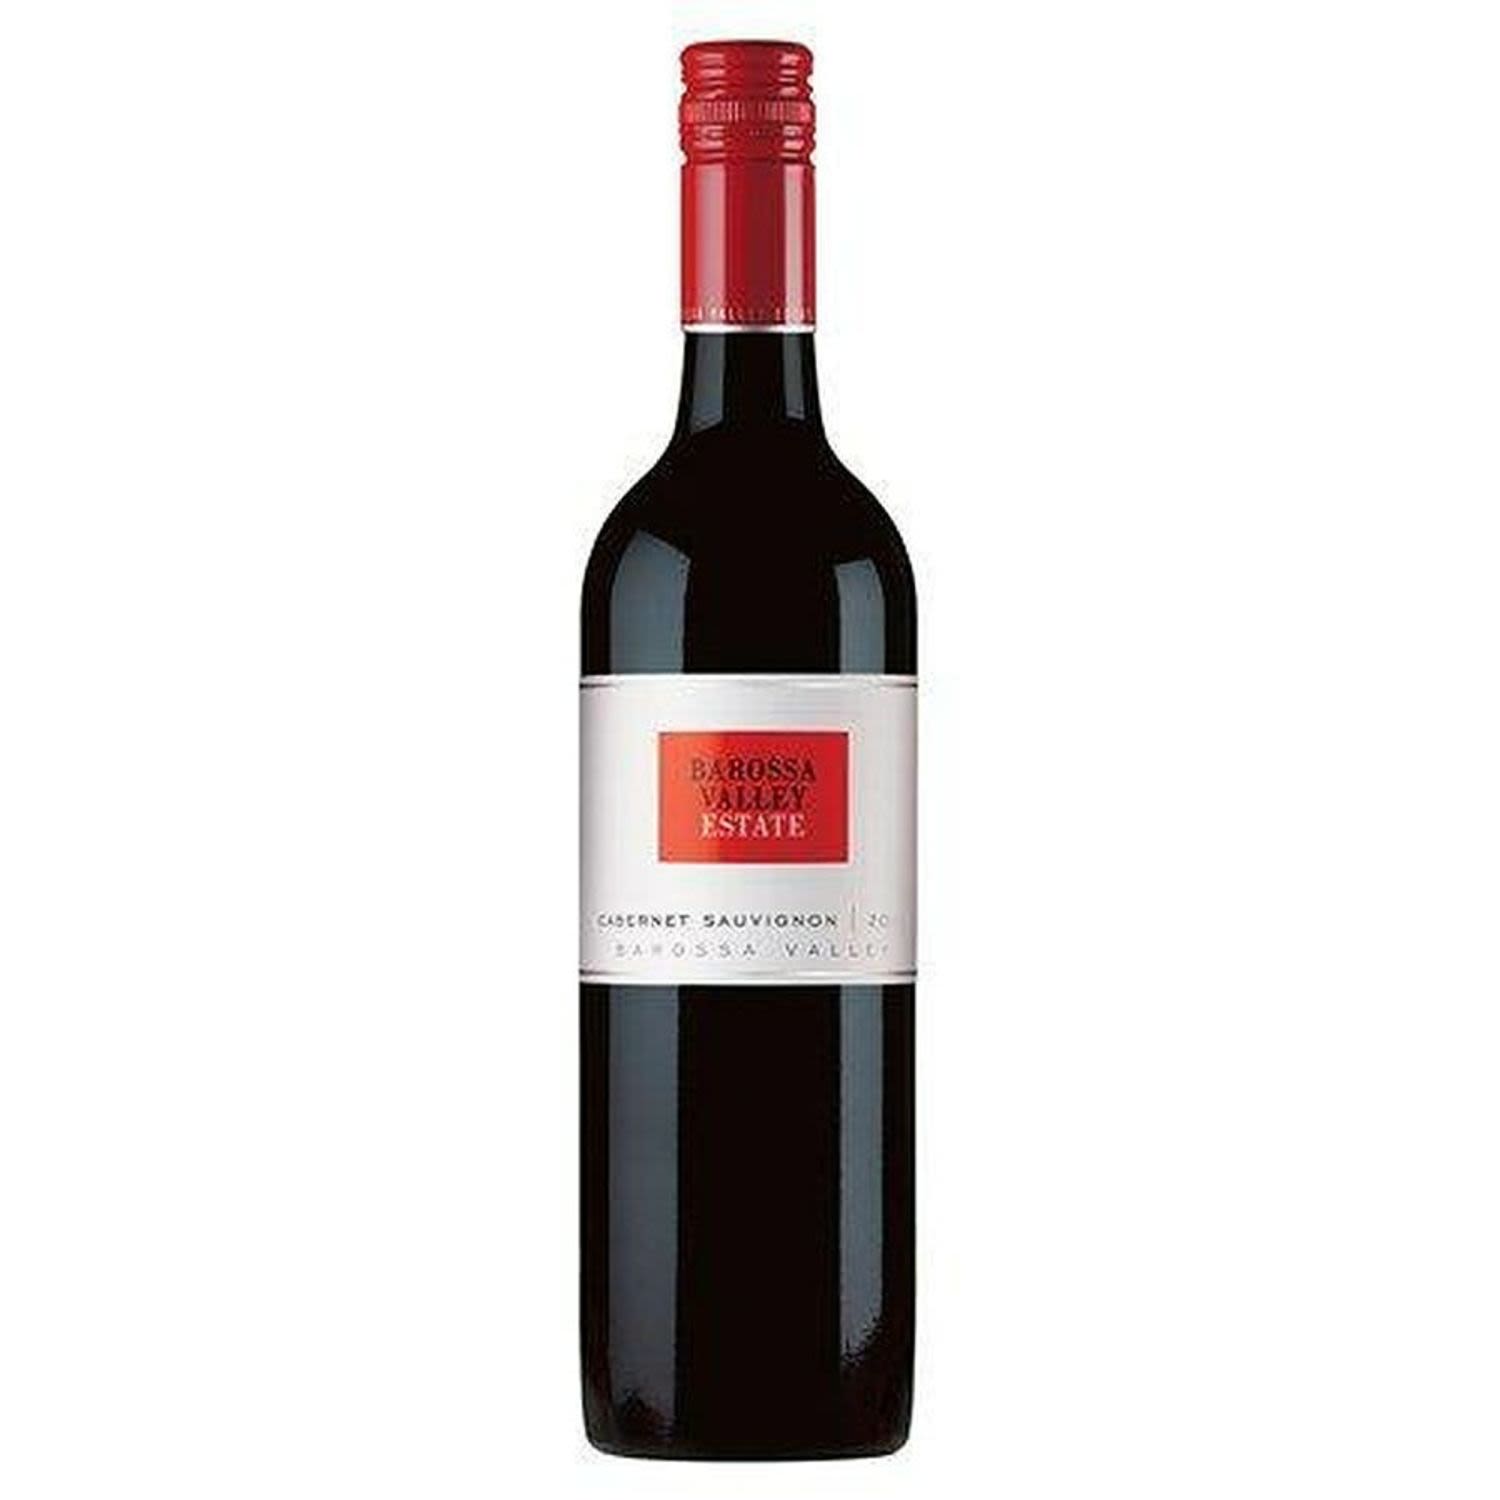 Cabernet Sauvignon is regarded as the king of red wines. The Barossa Valley Estate is an elegant yet very expressive wine, with a wonderful varietal character, seductive fine tannins and a blackcurrant richness.<br /> <br />Alcohol Volume: 14.00%<br /><br />Pack Format: Bottle<br /><br />Standard Drinks: 8.3</br /><br />Pack Type: Bottle<br /><br />Country of Origin: Australia<br /><br />Region: Barossa Valley<br /><br />Vintage: Vintages Vary<br />